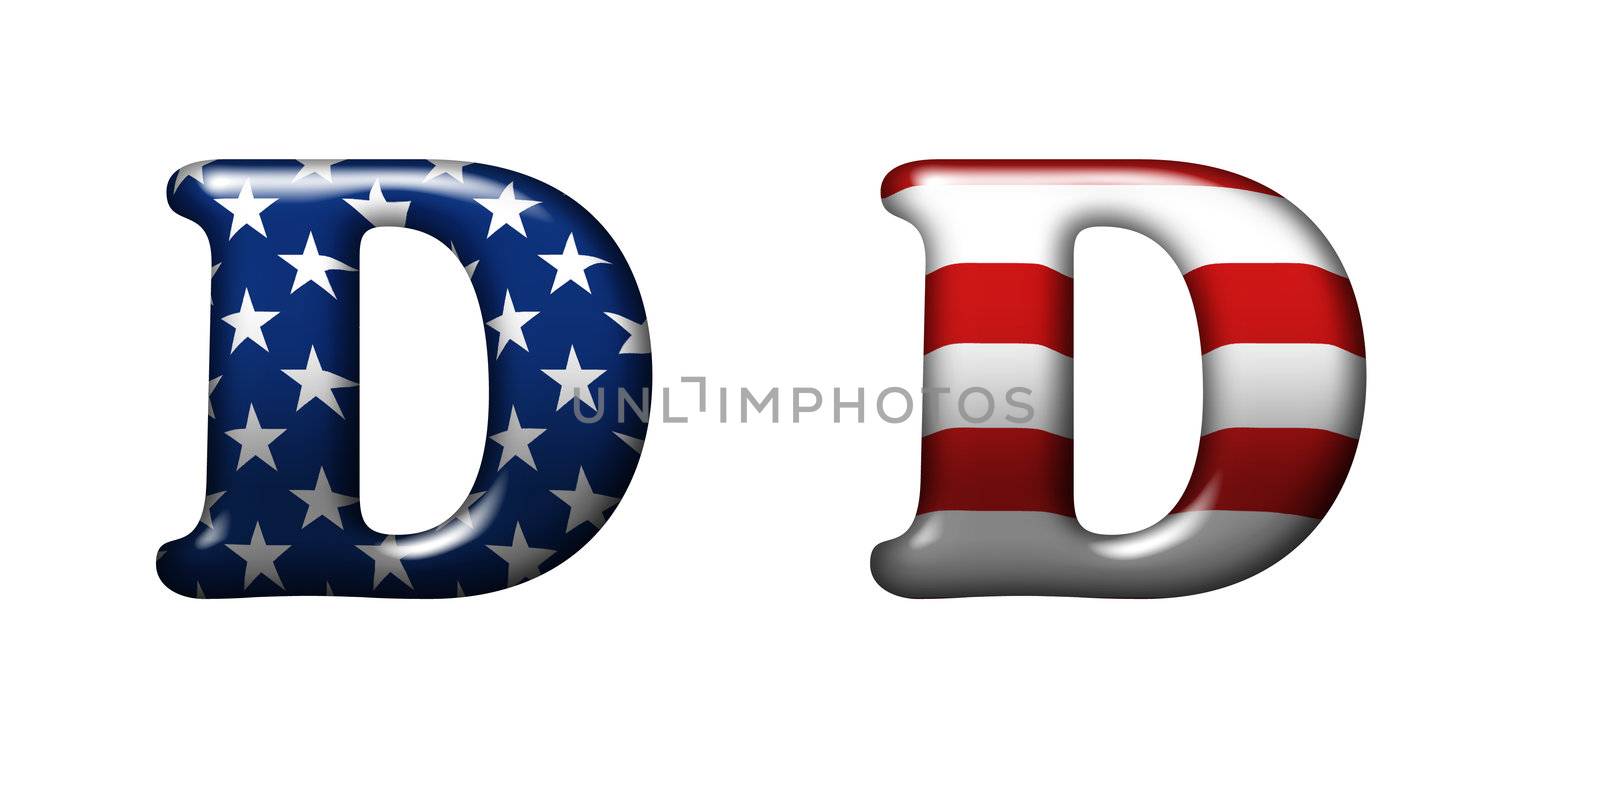 Exclusive collection letters with american stars and stripes by mozzyb